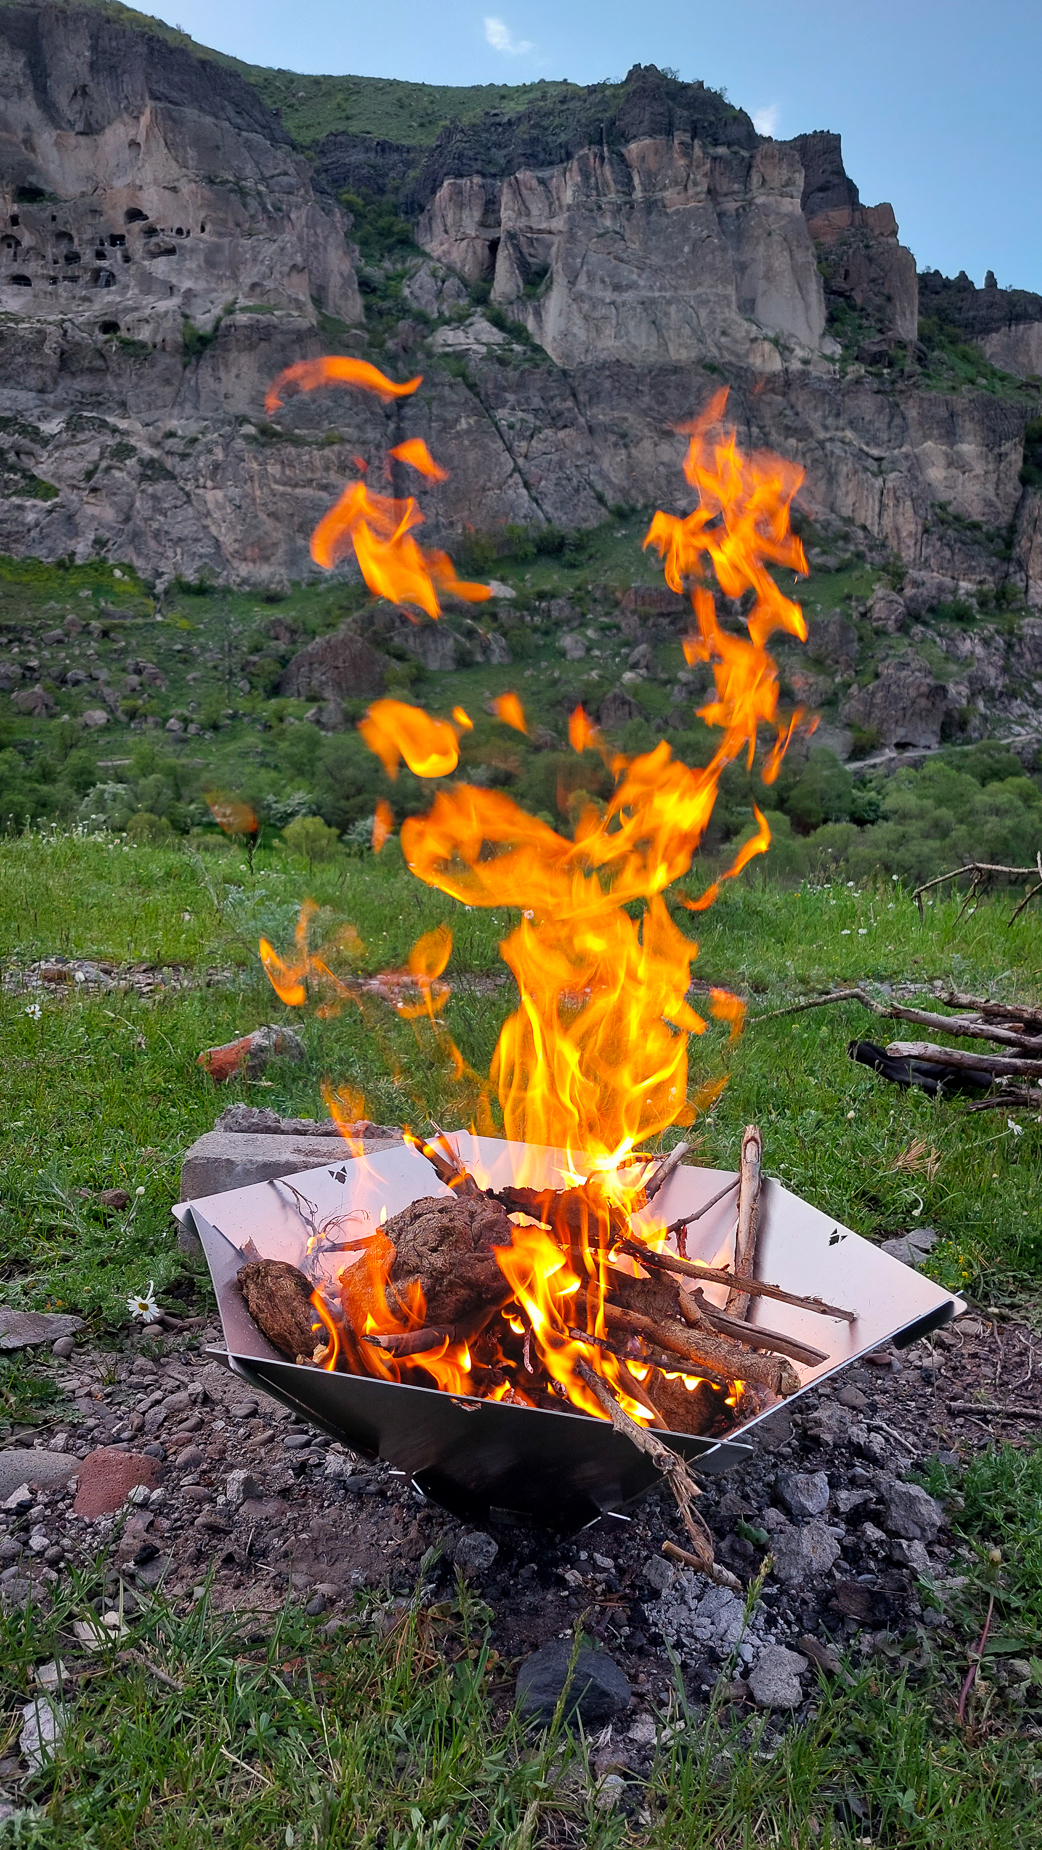 <span  class="uc_style_uc_tiles_grid_image_elementor_uc_items_attribute_title" style="color:#ffffff;">here and there we make a camp fire</span>